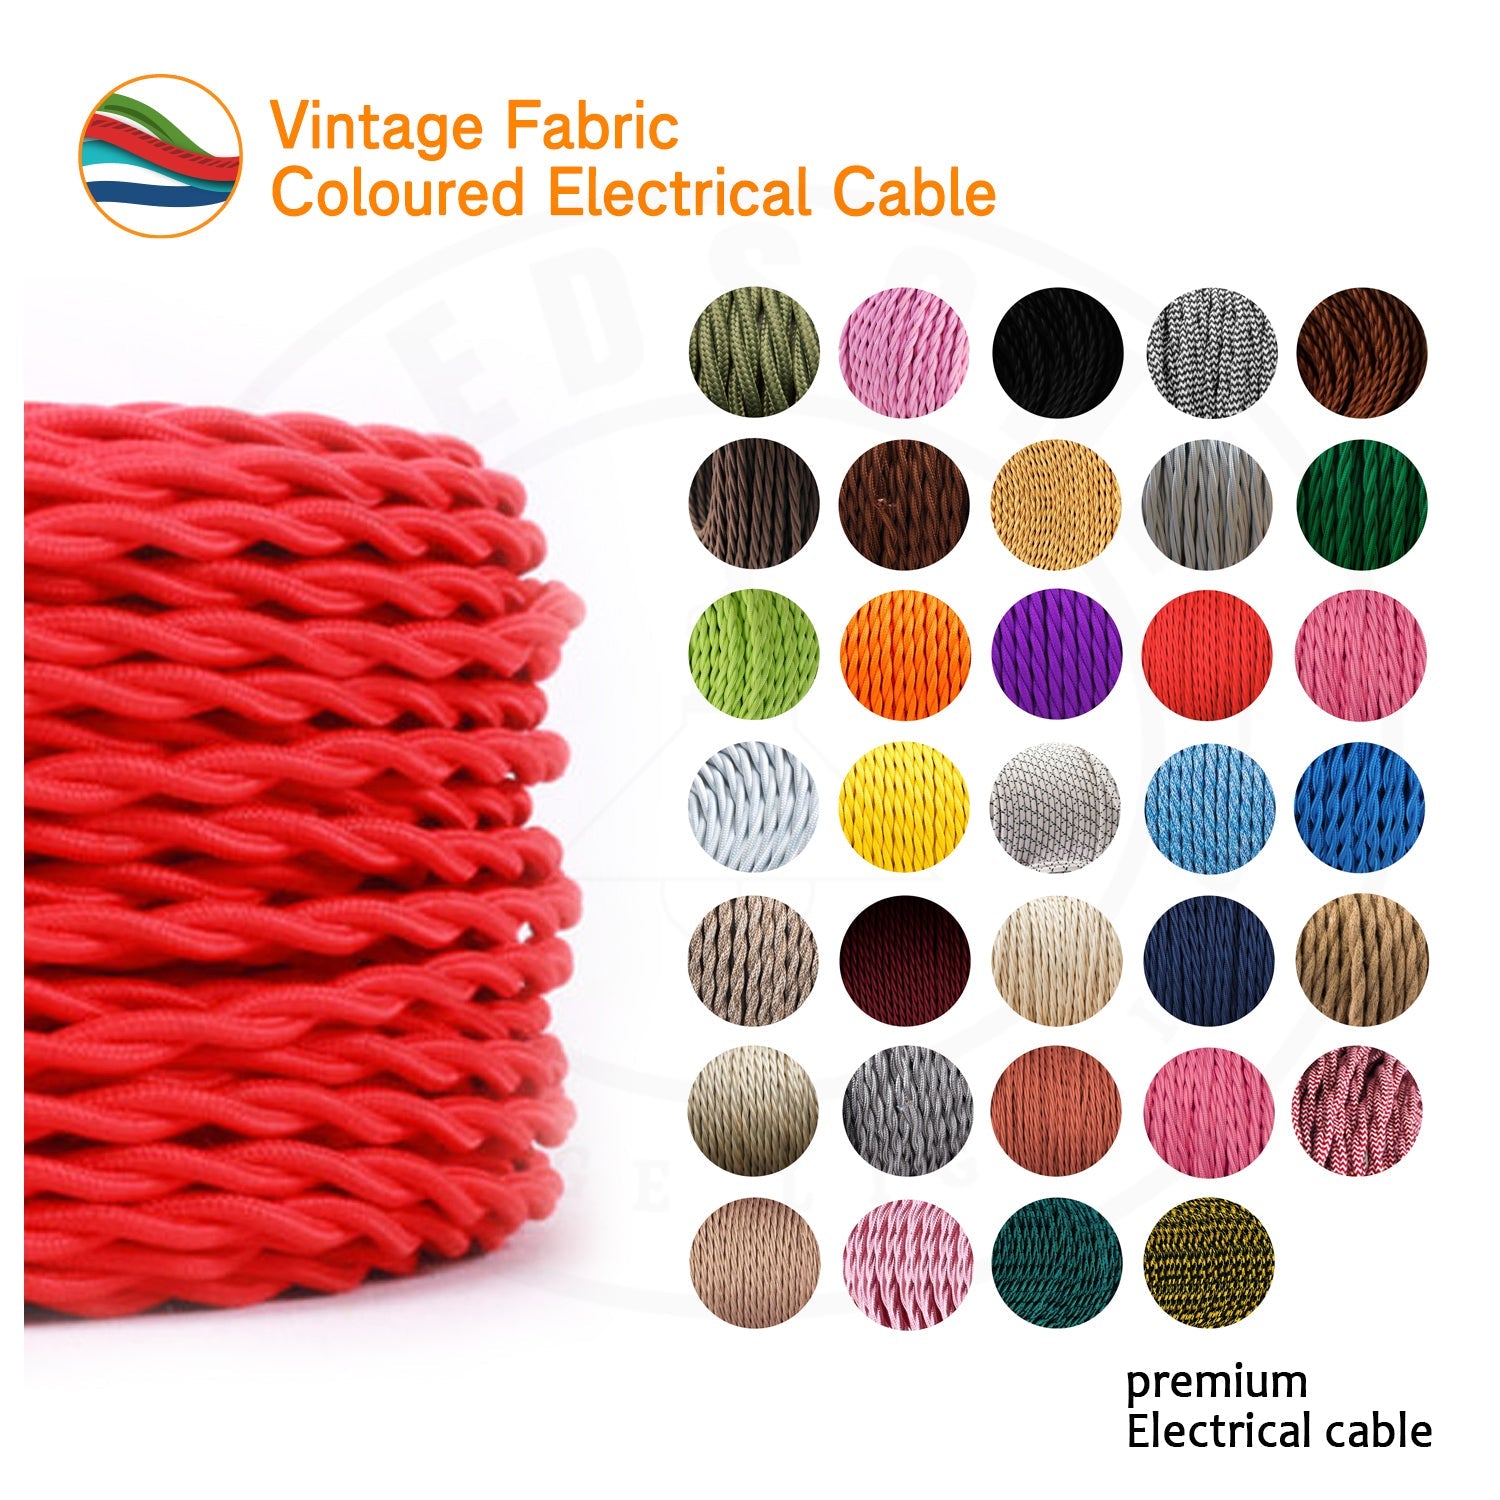 10m 3 Core Twisted Red Vintage Electric Fabric Cable Flex 0.75mm~4846